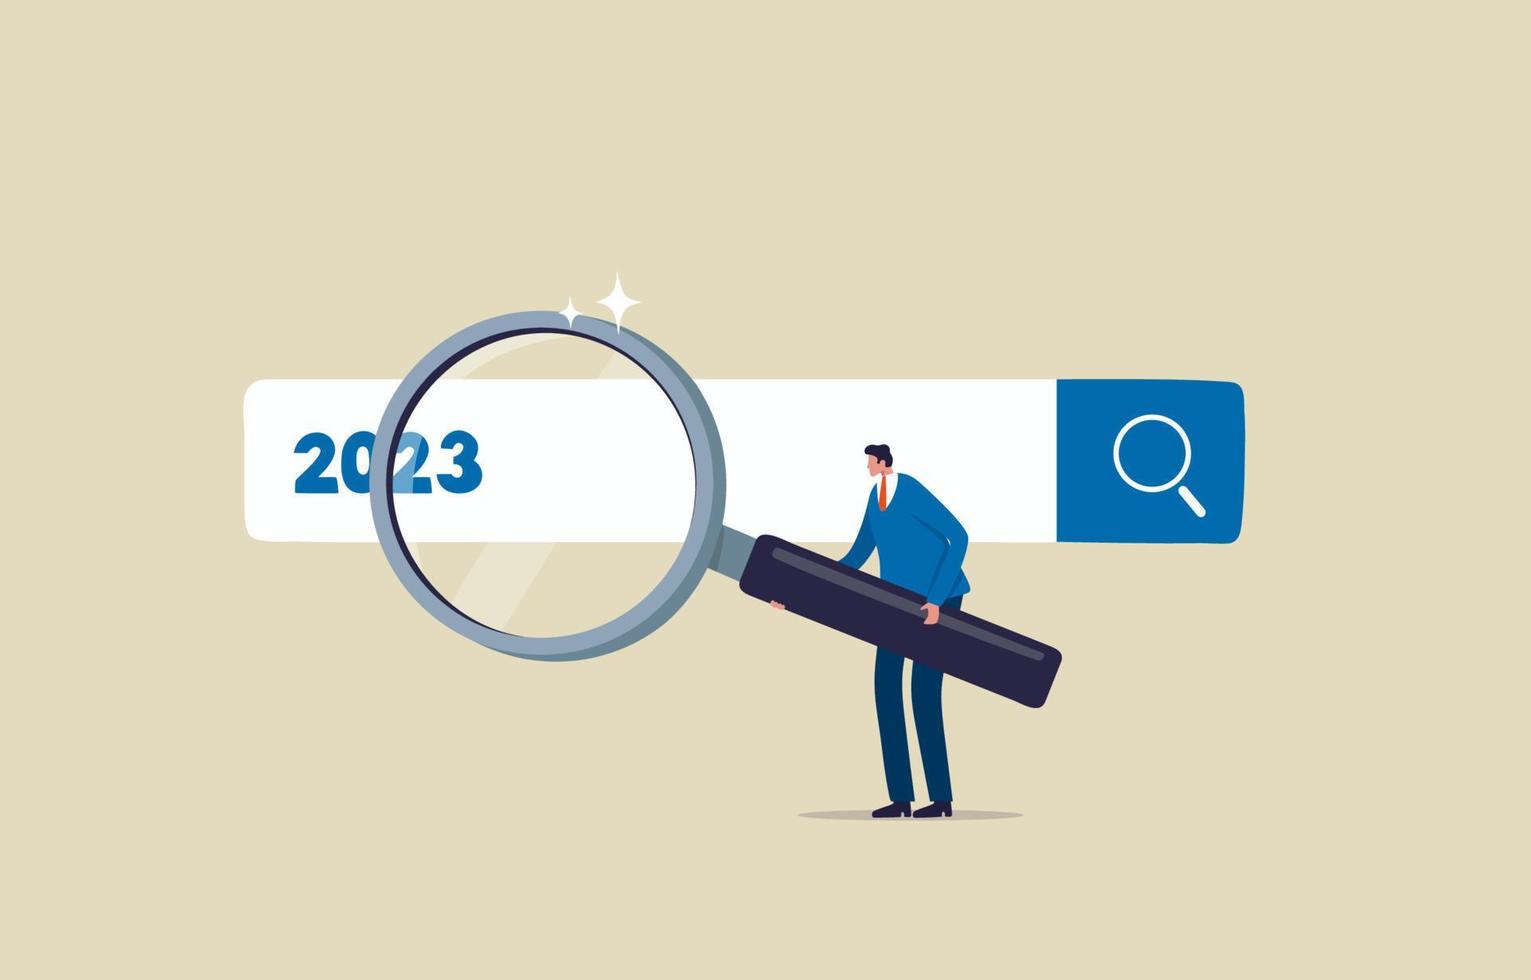 Find new inspiration in 2023. New Year resolution. Business opportunities or career challenges. Man holding magnifying glass for search box. illustration vector